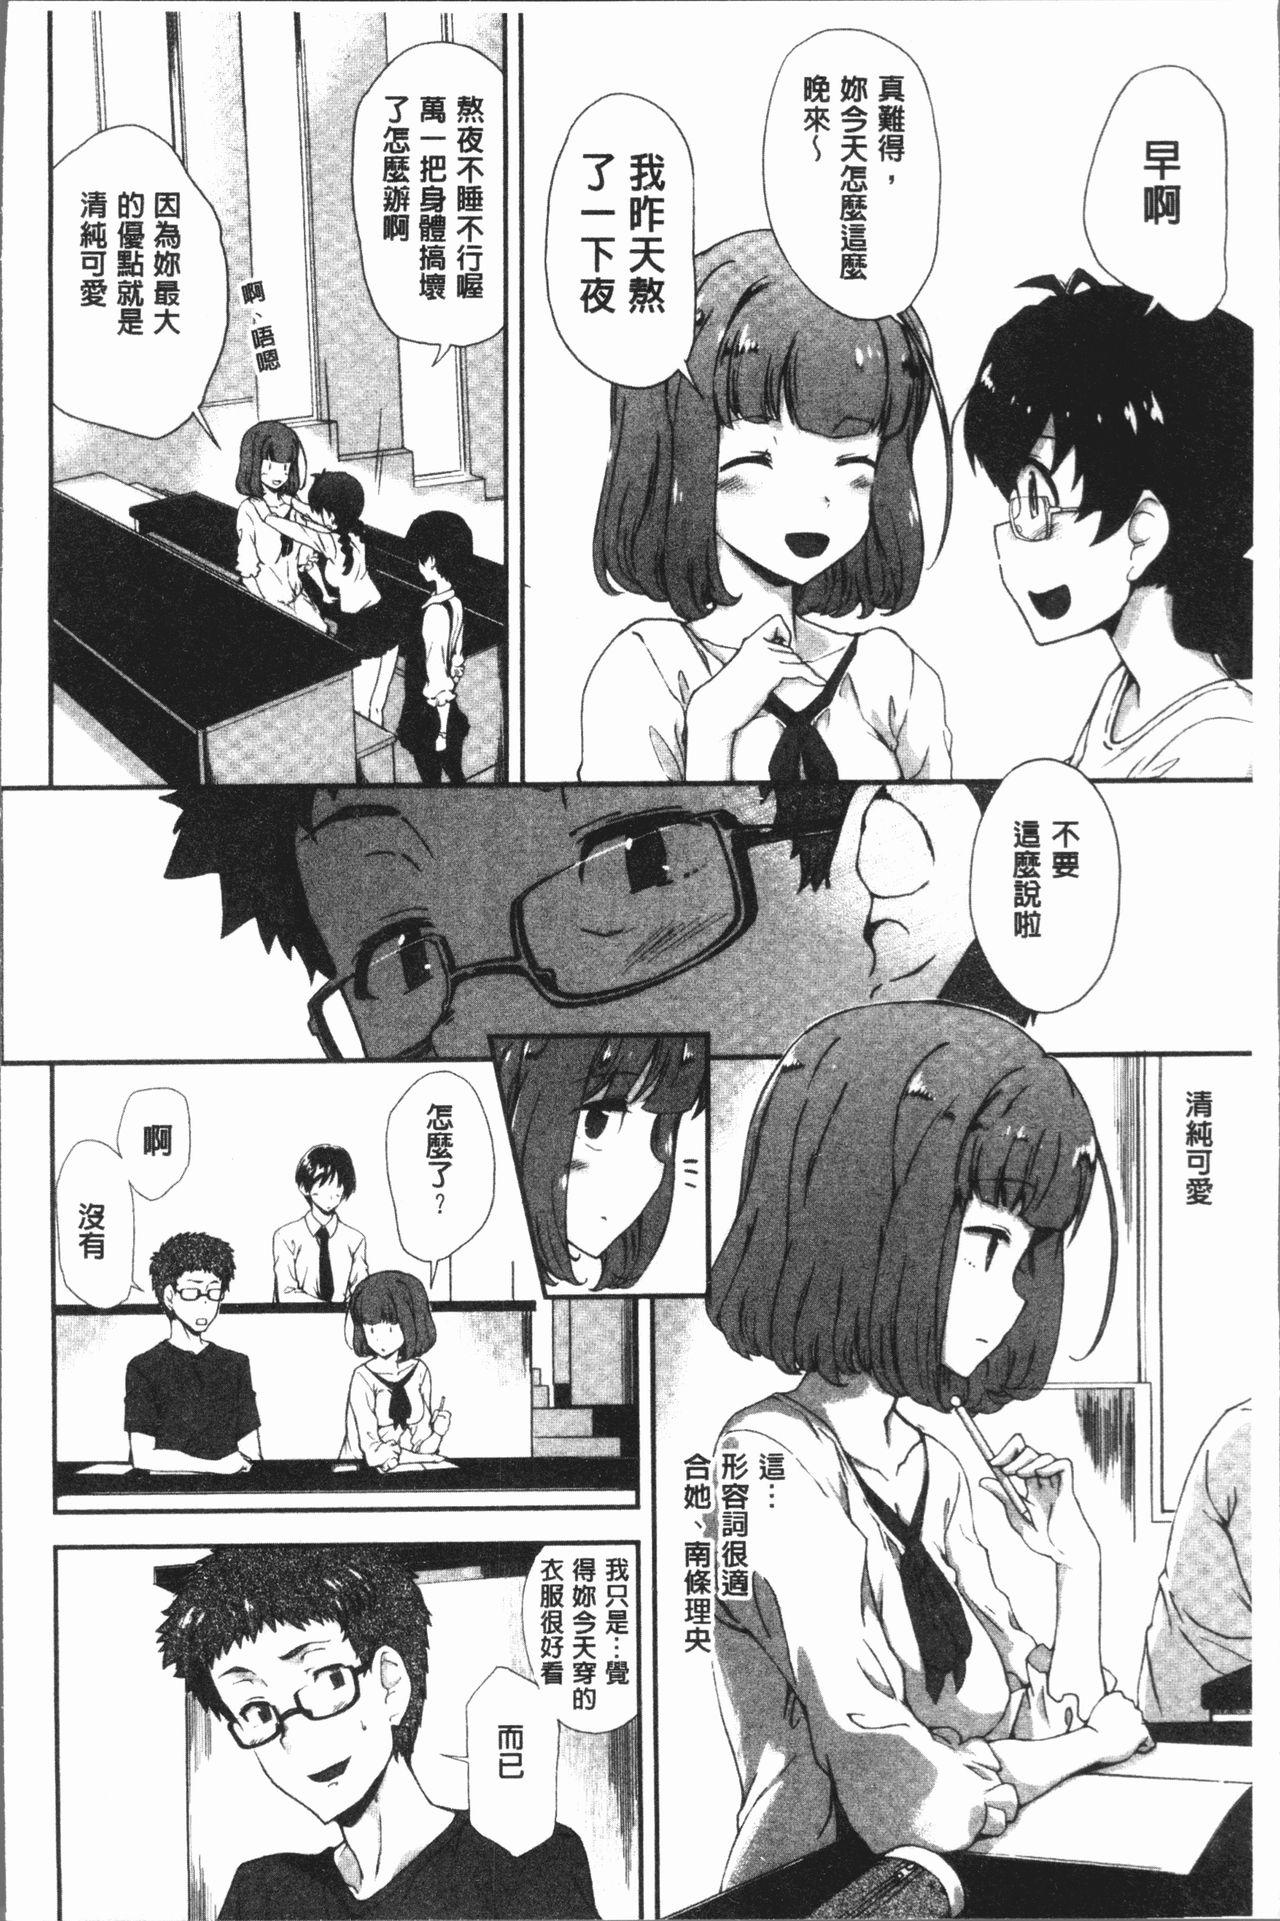 Teen Sex Mienai Tokoro de - I almost can see you | 在看不到的地方做 Babe - Page 6